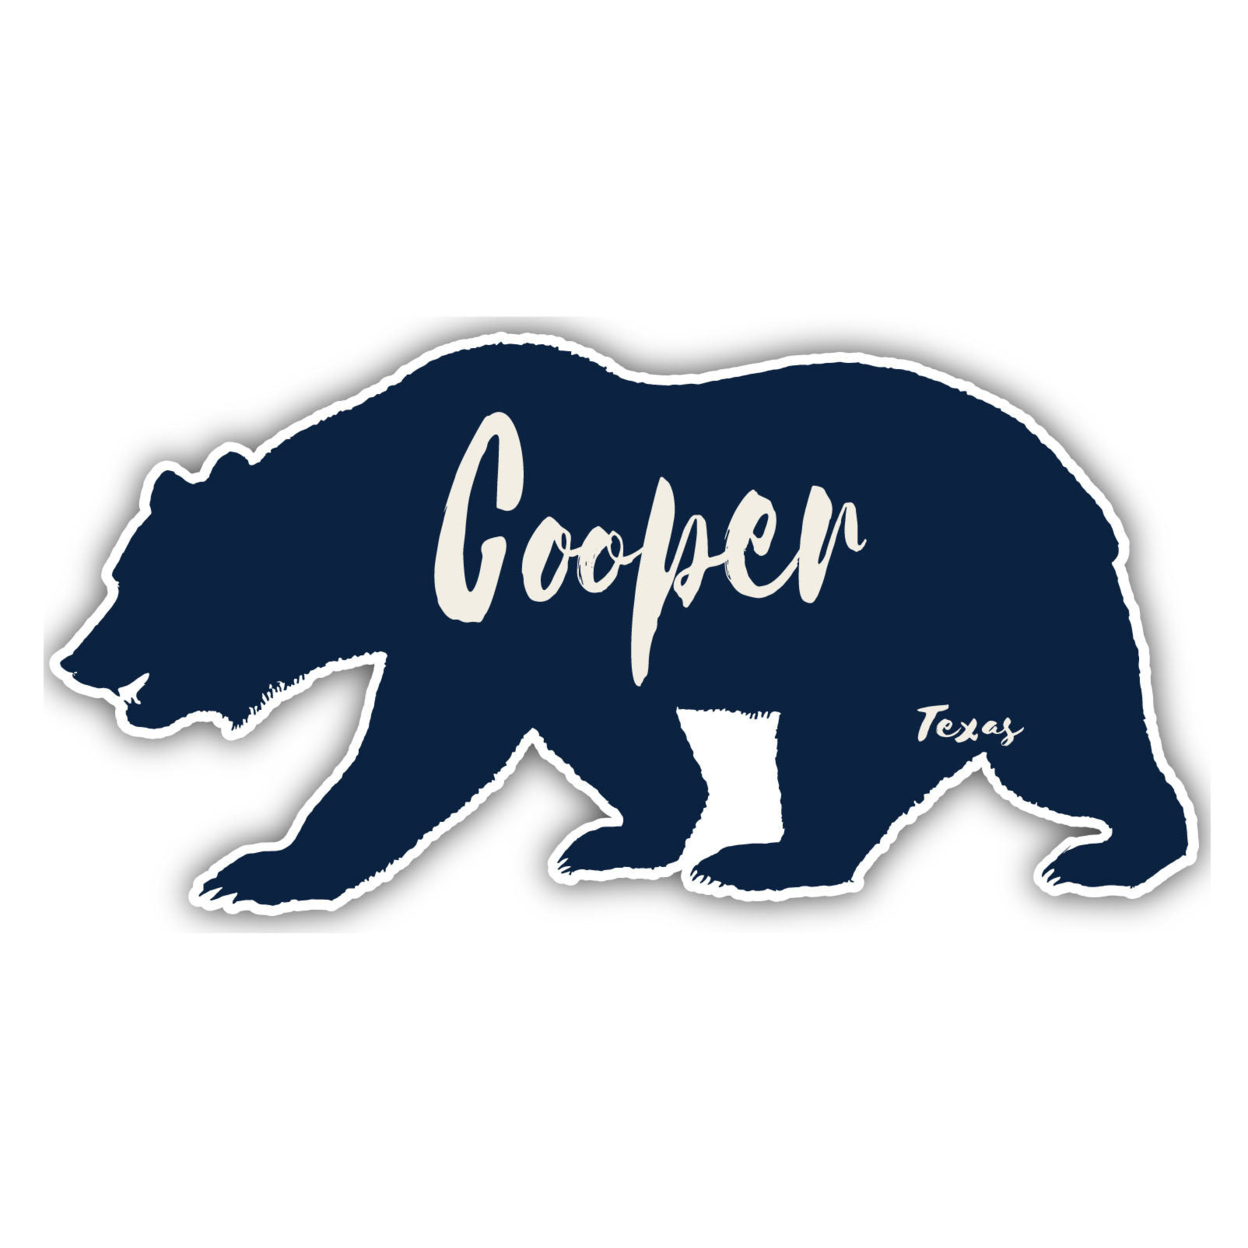 Cooper Texas Souvenir Decorative Stickers (Choose Theme And Size) - 4-Pack, 2-Inch, Bear